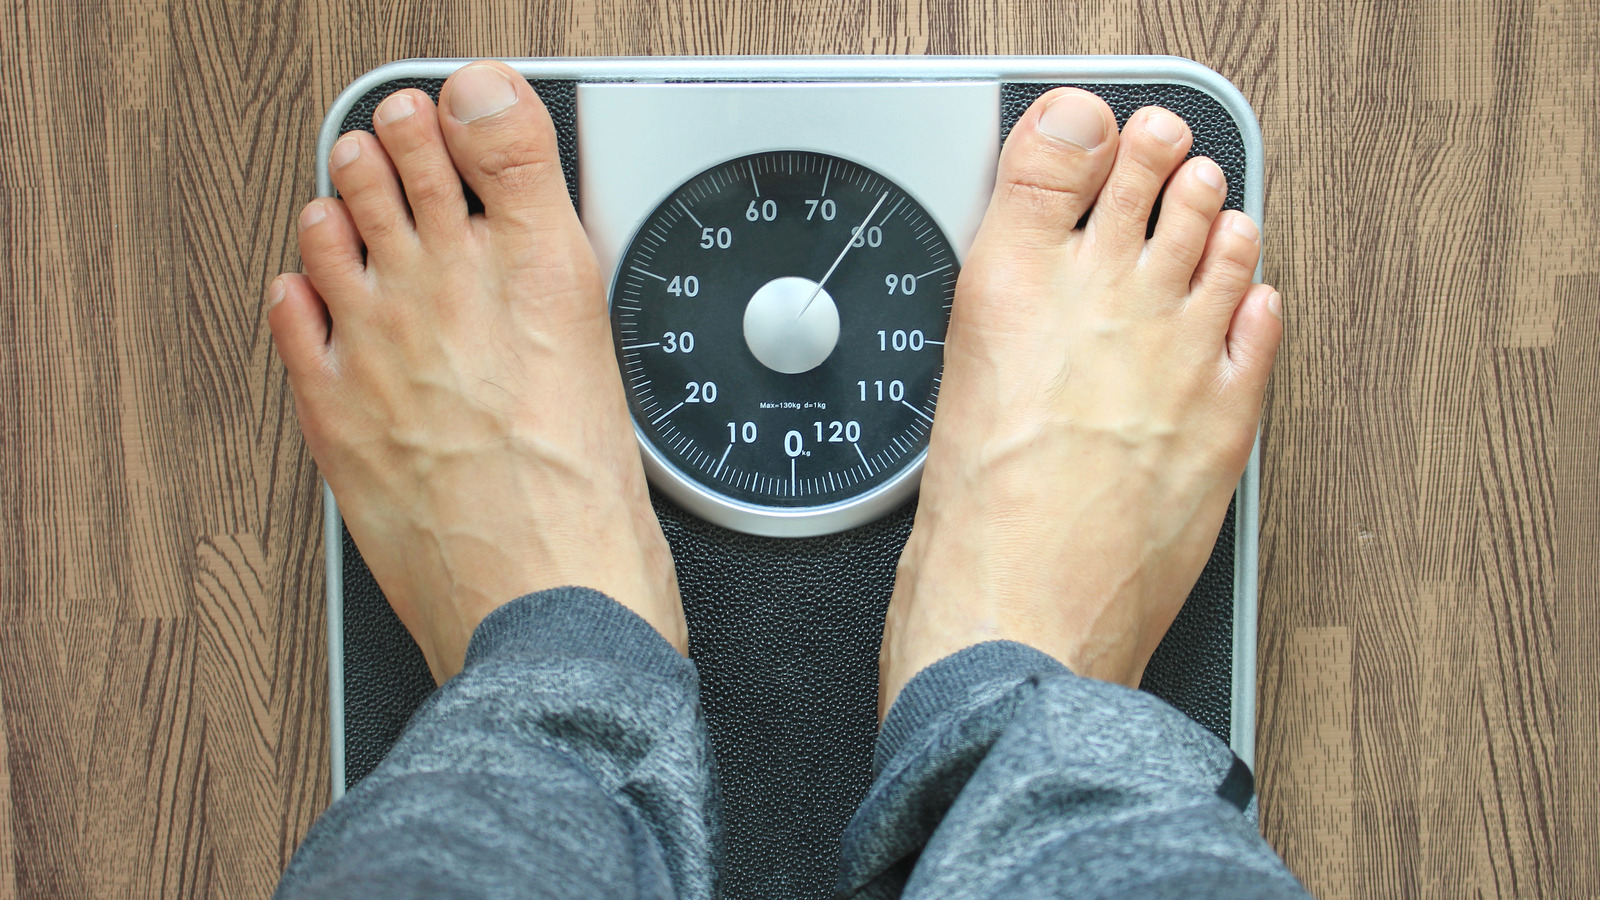 What is the average weight for men?